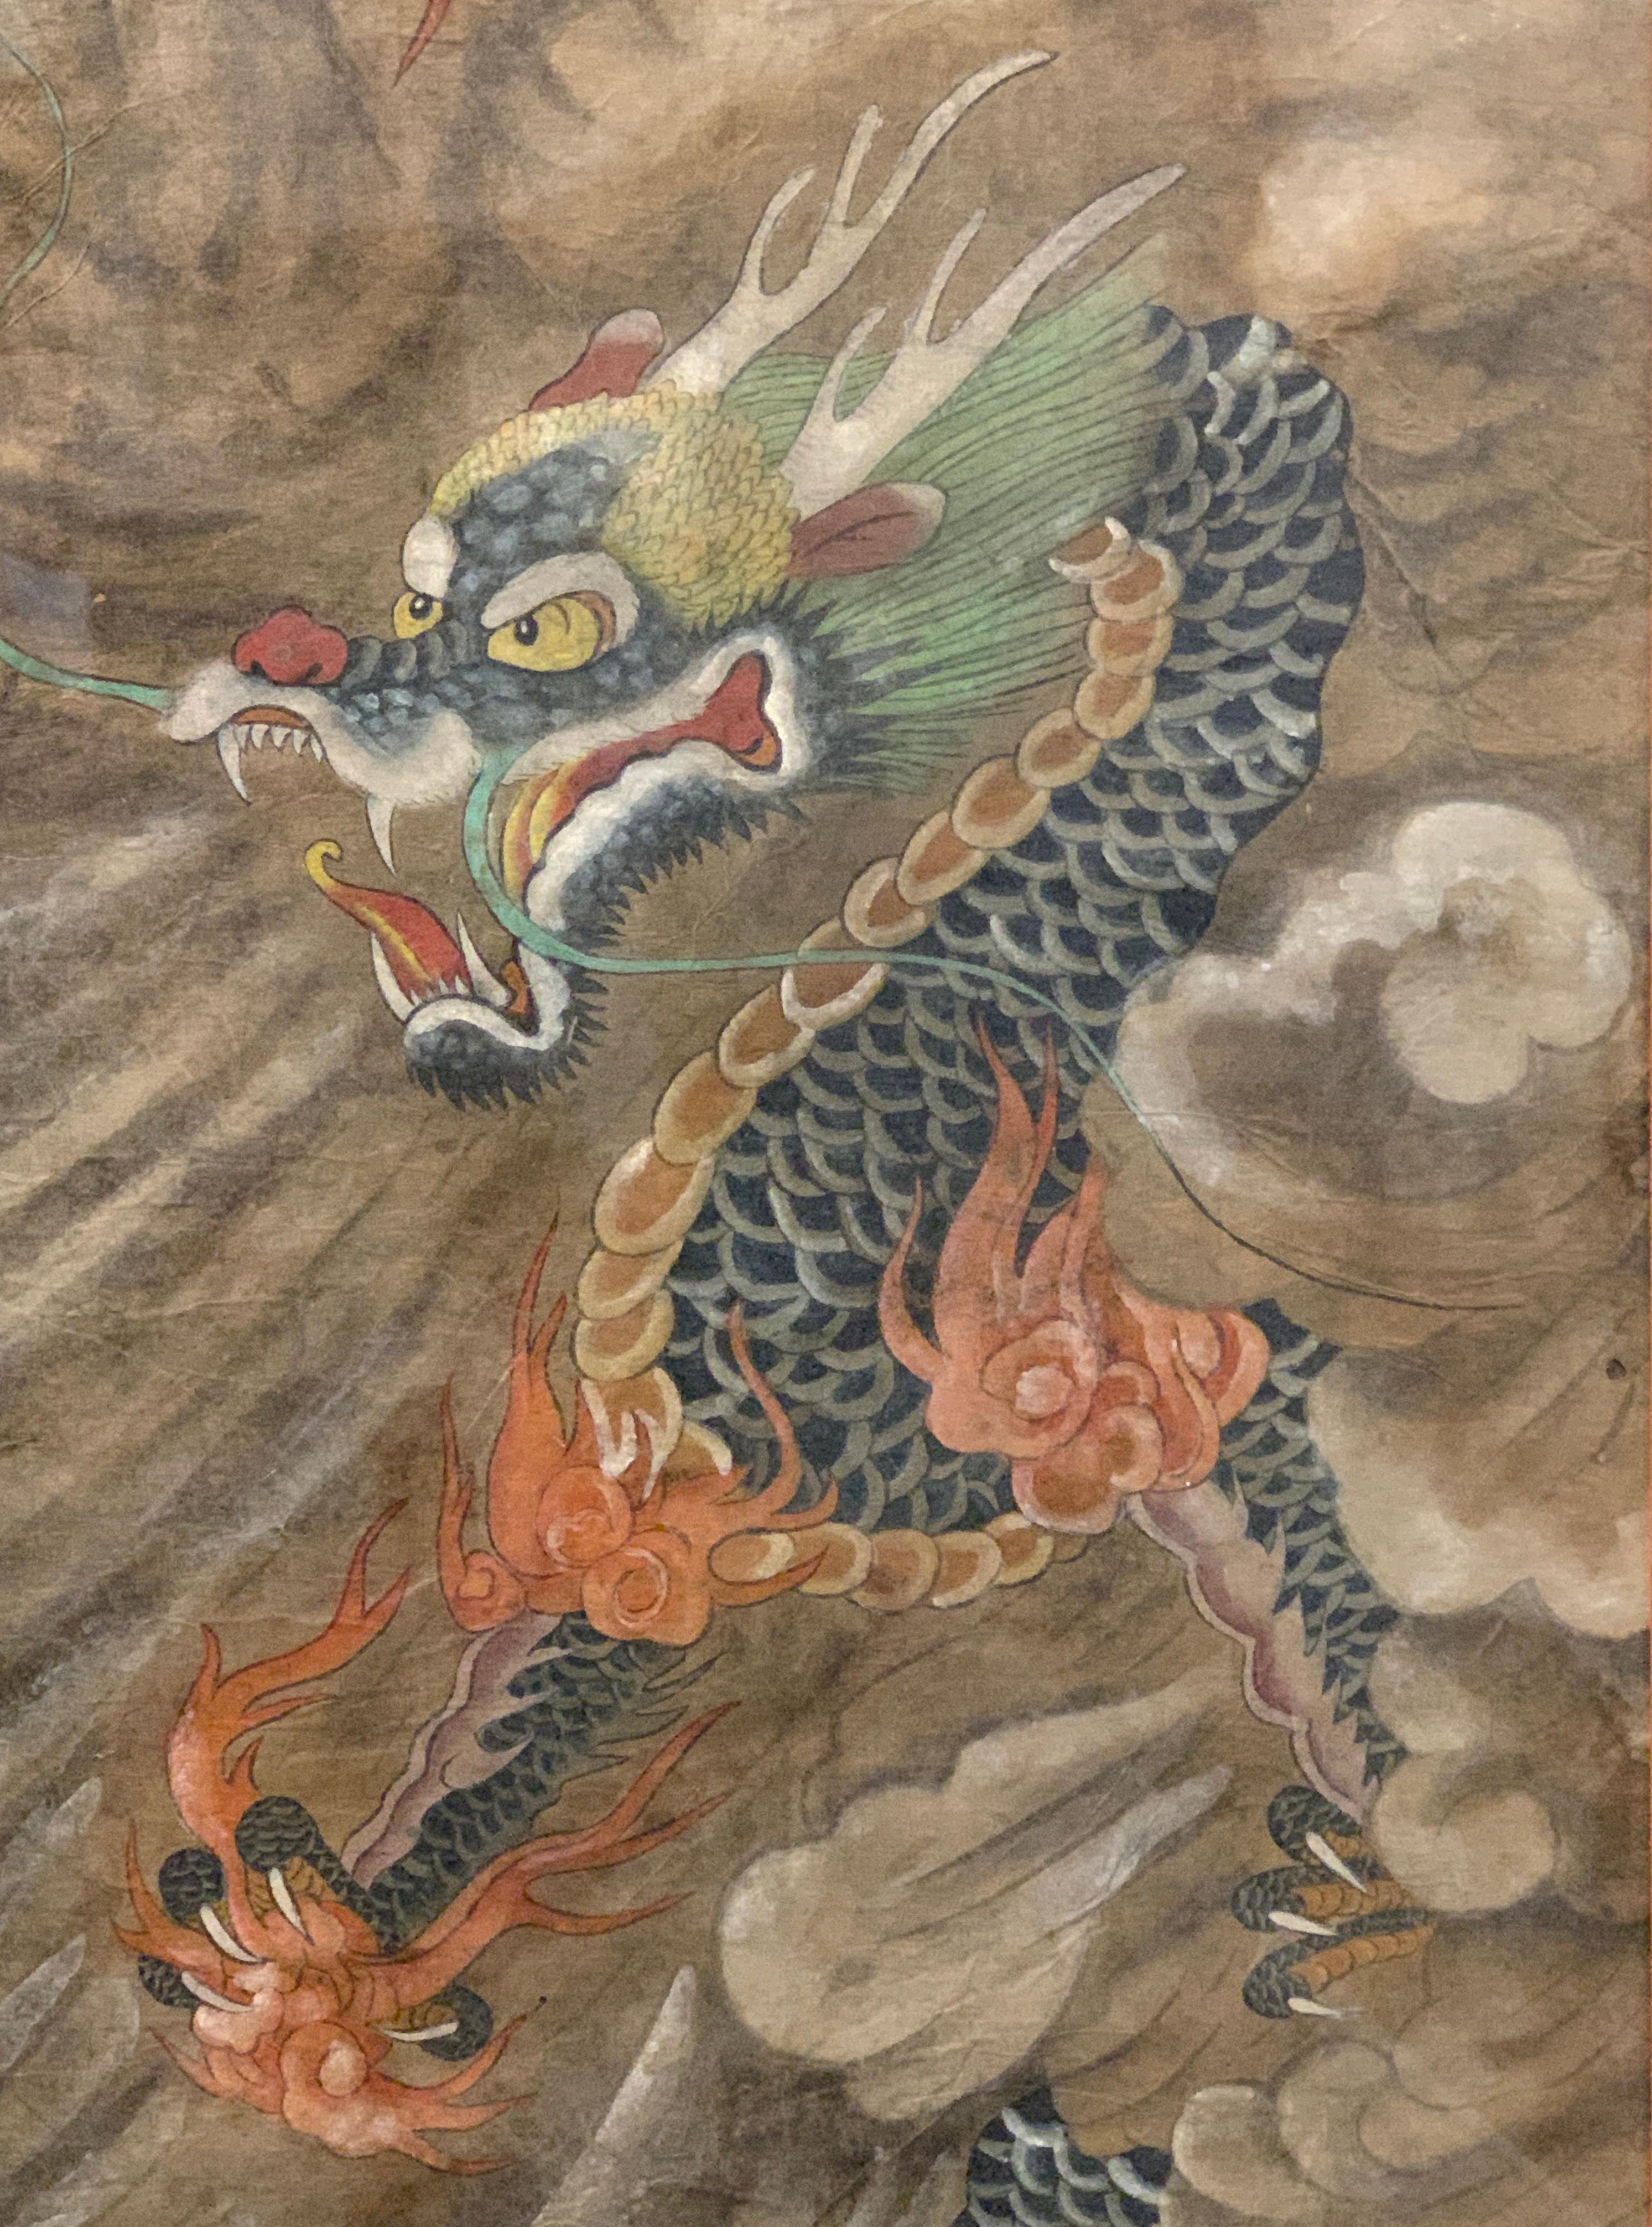 A powerful Korean folk painting (minhwa) of a dragon, ink and color on handmade mulberry paper, framed and glazed, Joseon Dynasty, late 19th century, Korea.

The dynamic folk painting, called minhwa in Korean, features an vigorous dragon emerging